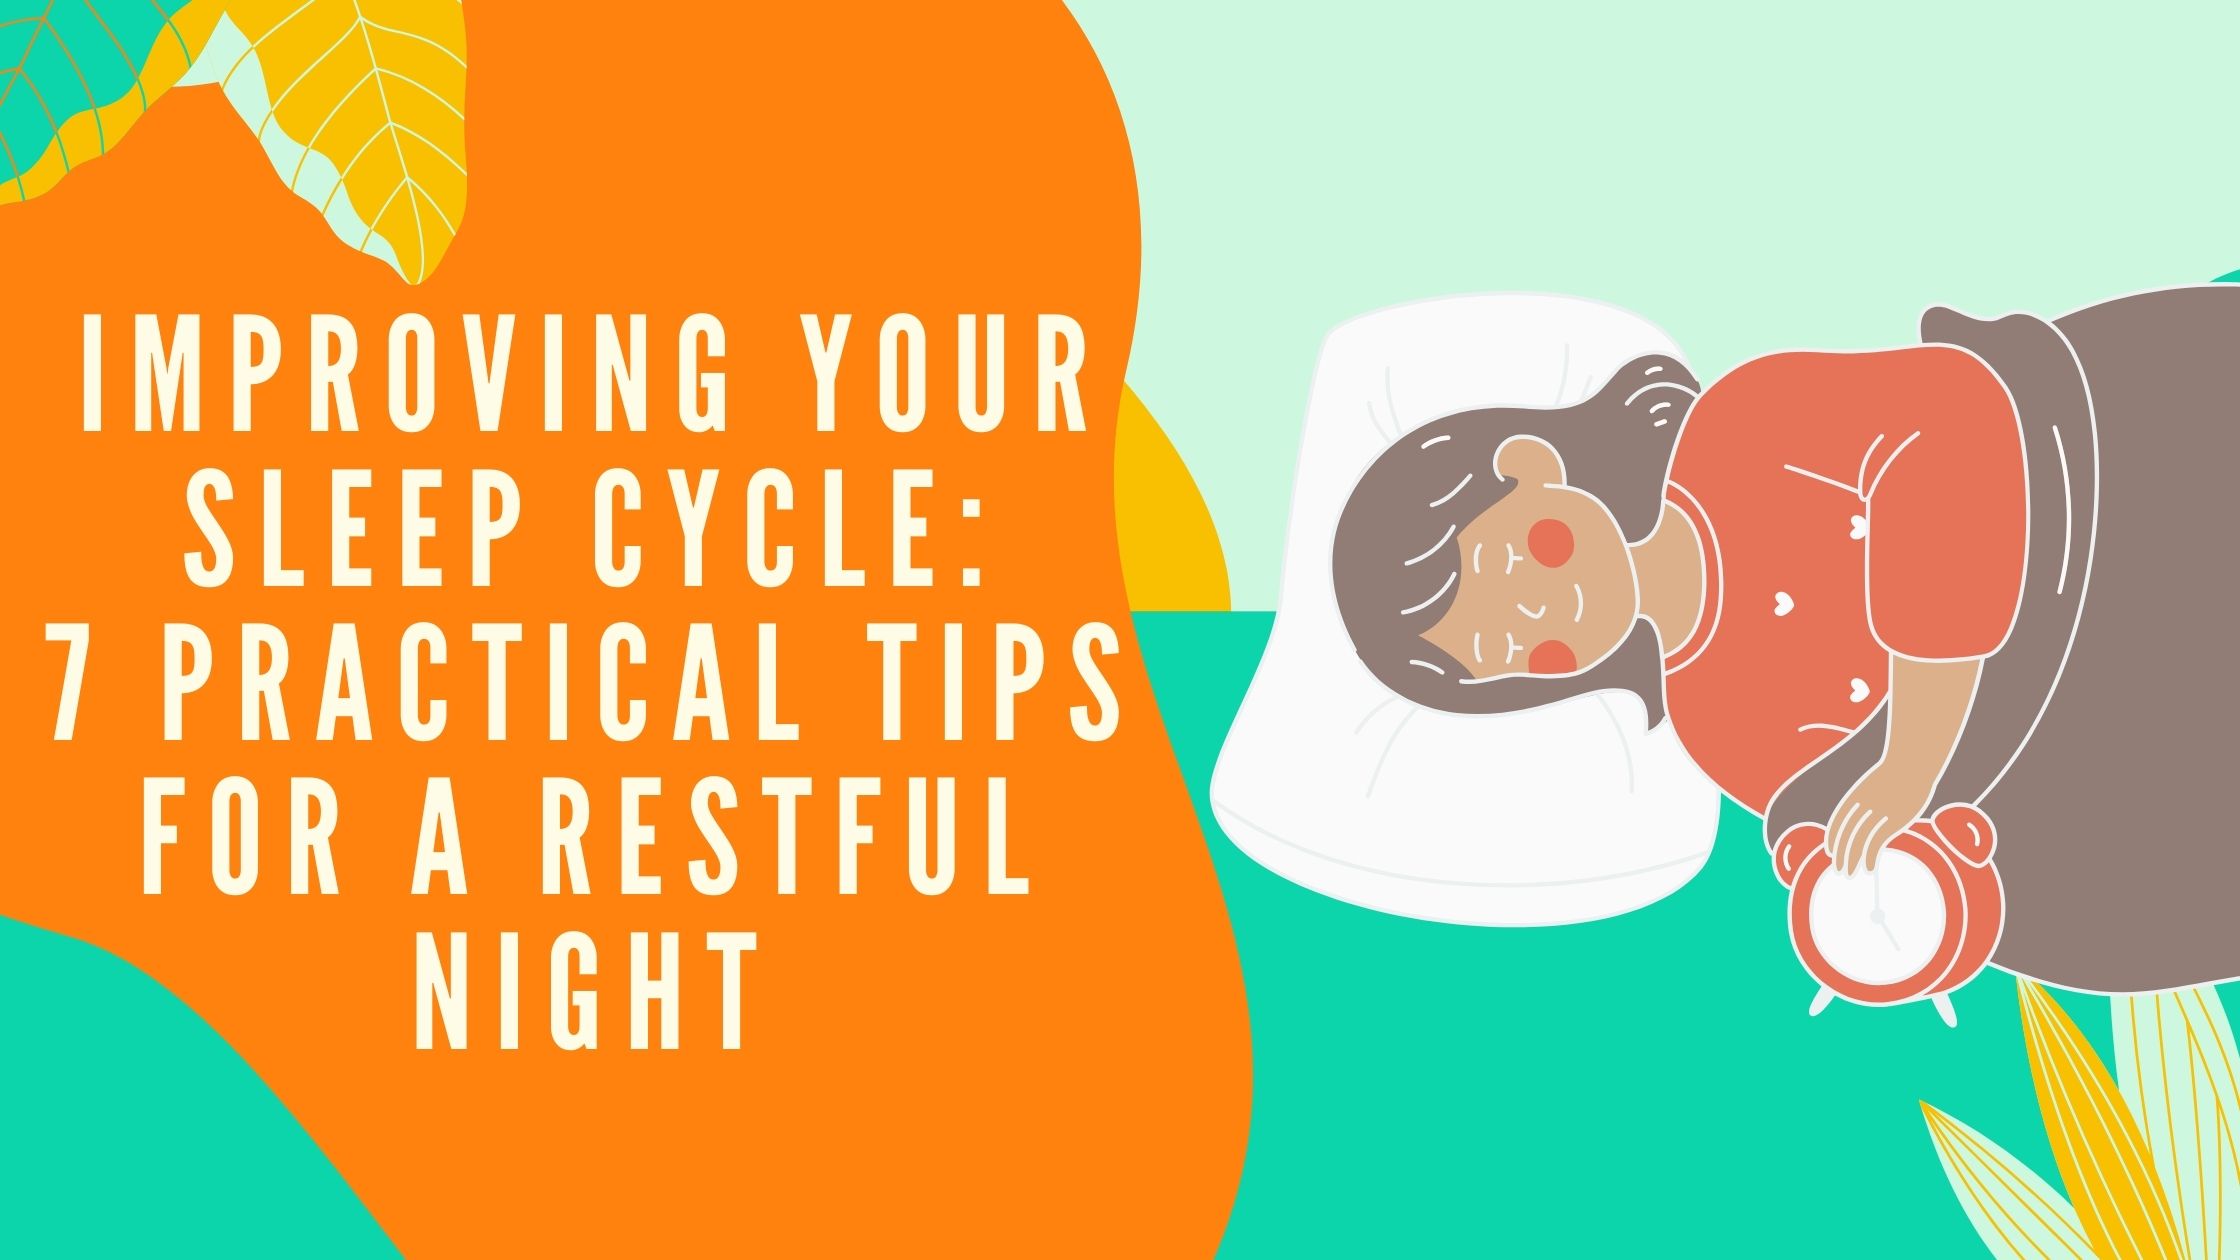 Improving Your Sleep Cycle: 7 Practical Tips for a Restful Night